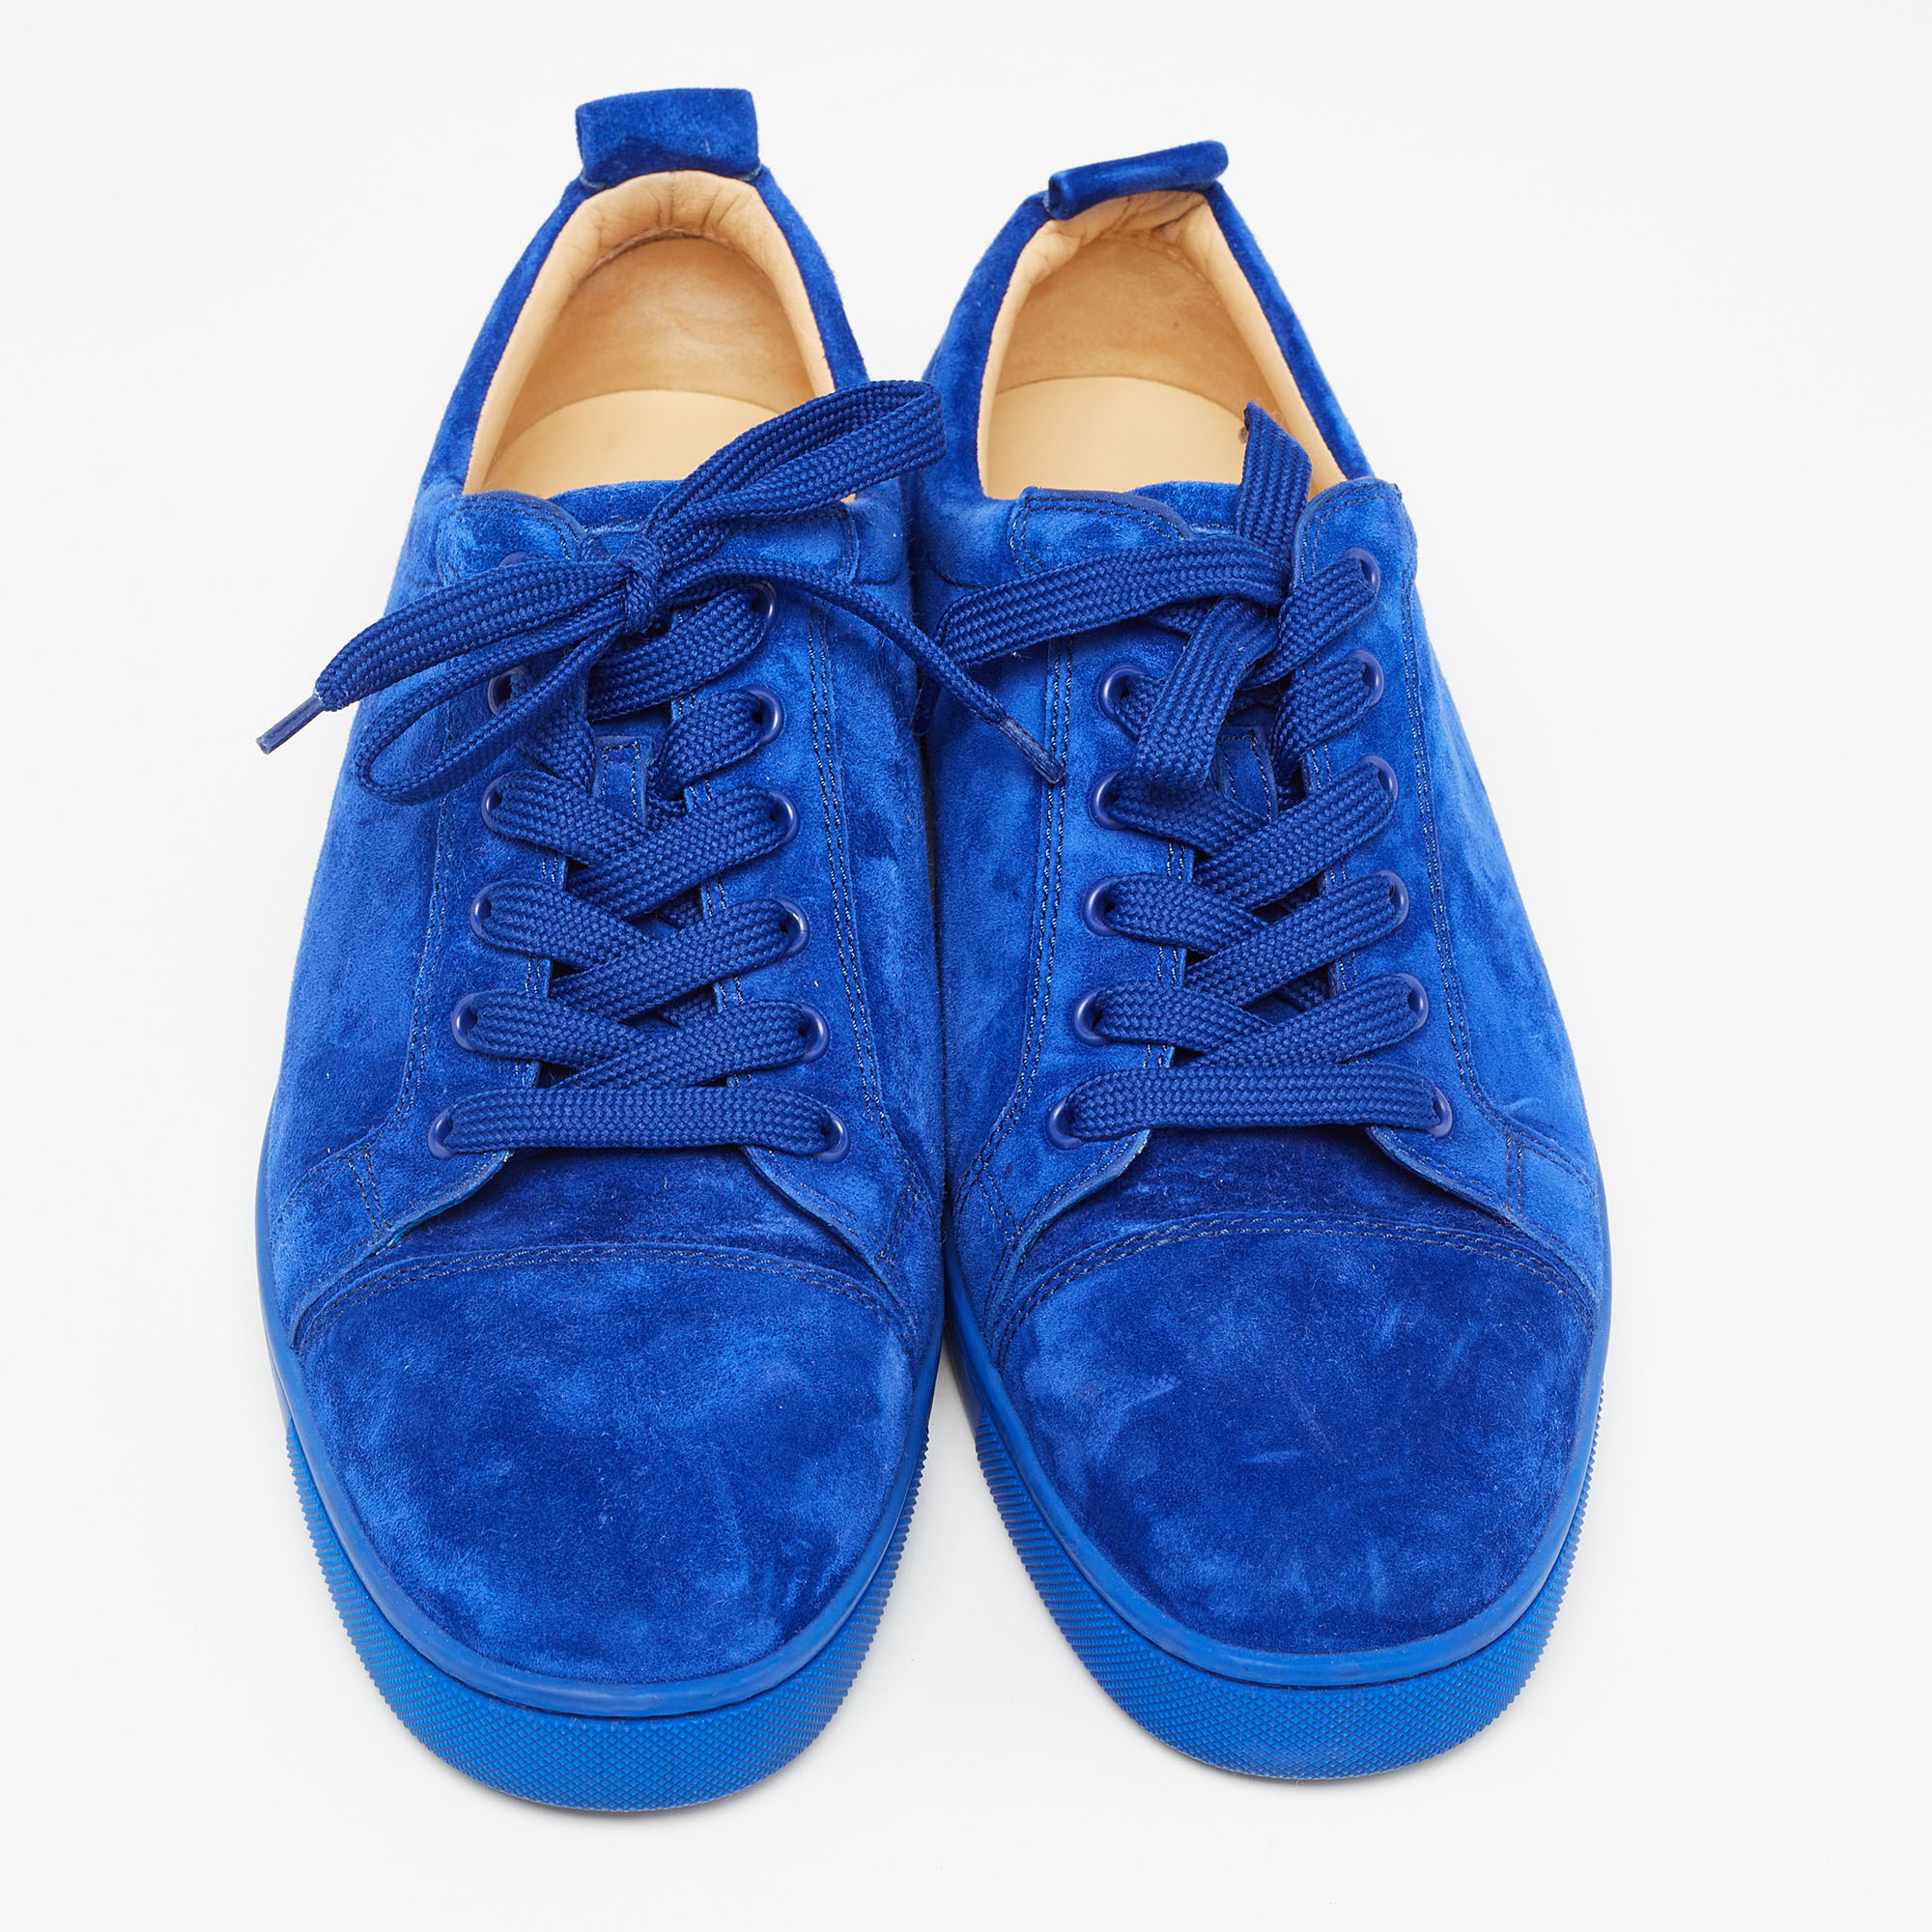 Christian Louboutin Blue Suede Leather Low Top Sneakers Size 42.5